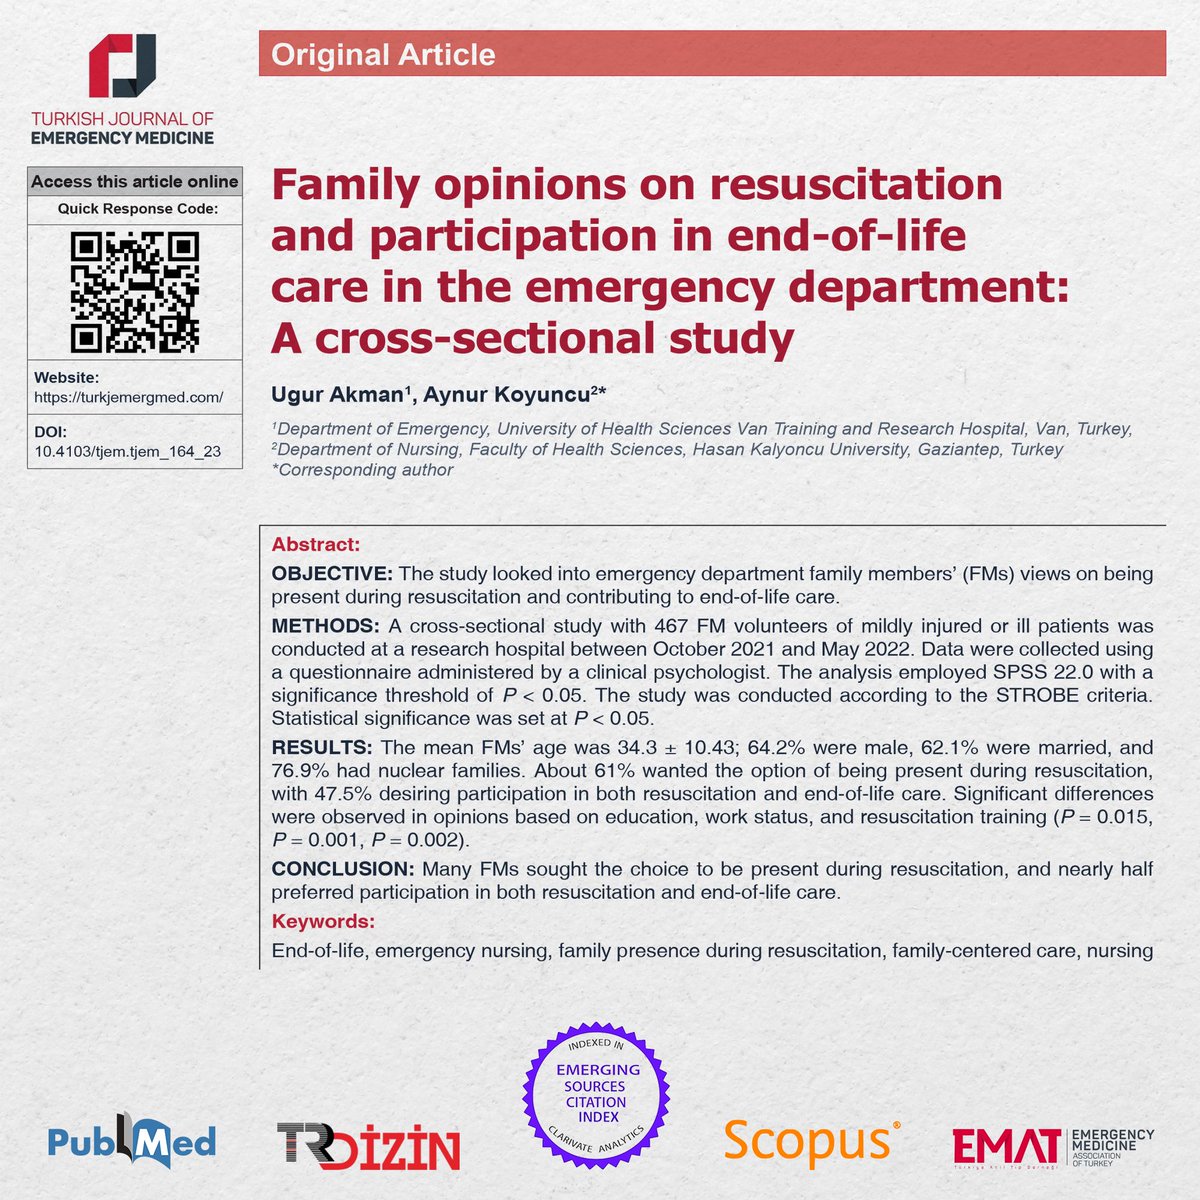 Article from 2024/1: Akman and Koyuncu, Family opinions on resuscitation and participation in end‑of‑life care in the emergency department: A cross‑sectional study #TurkJEmergMed #FOAMed #MedEd #EmergencyMedicine #OriginalArticle Full text: buff.ly/49uI6Nd